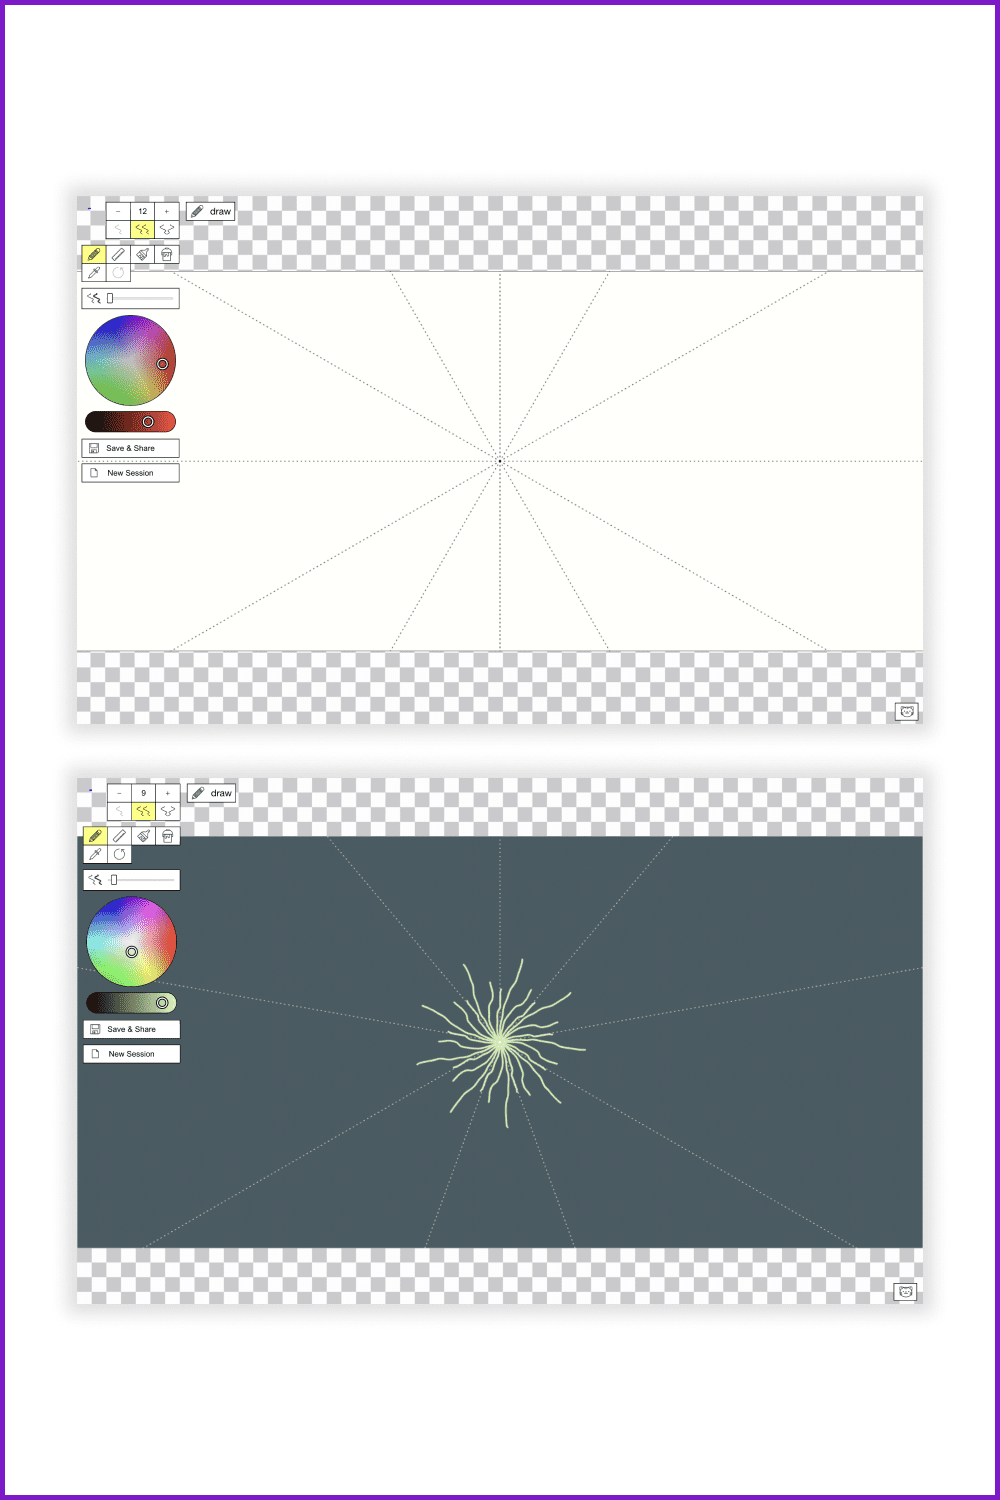 An example of displaying a graphical editor for creating a mandala is presented.